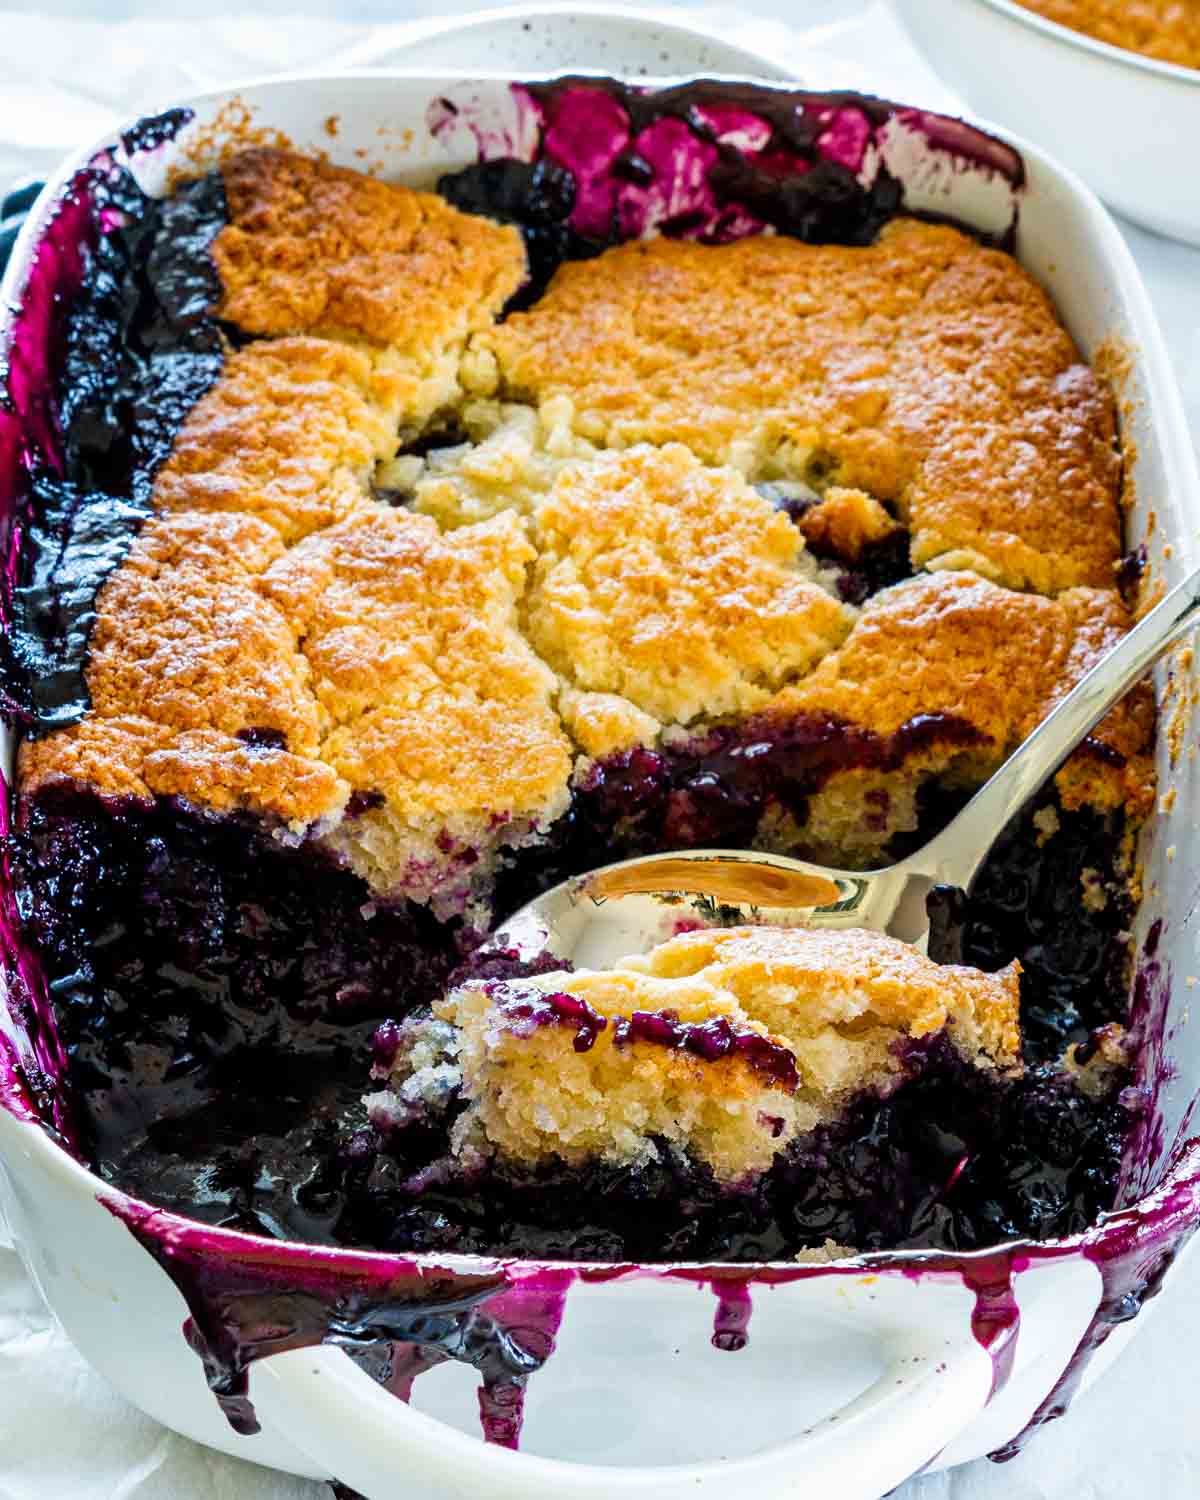 sideview shot of a blueberry cobbler in a baking dish with a a serving spoon taking a scoop out